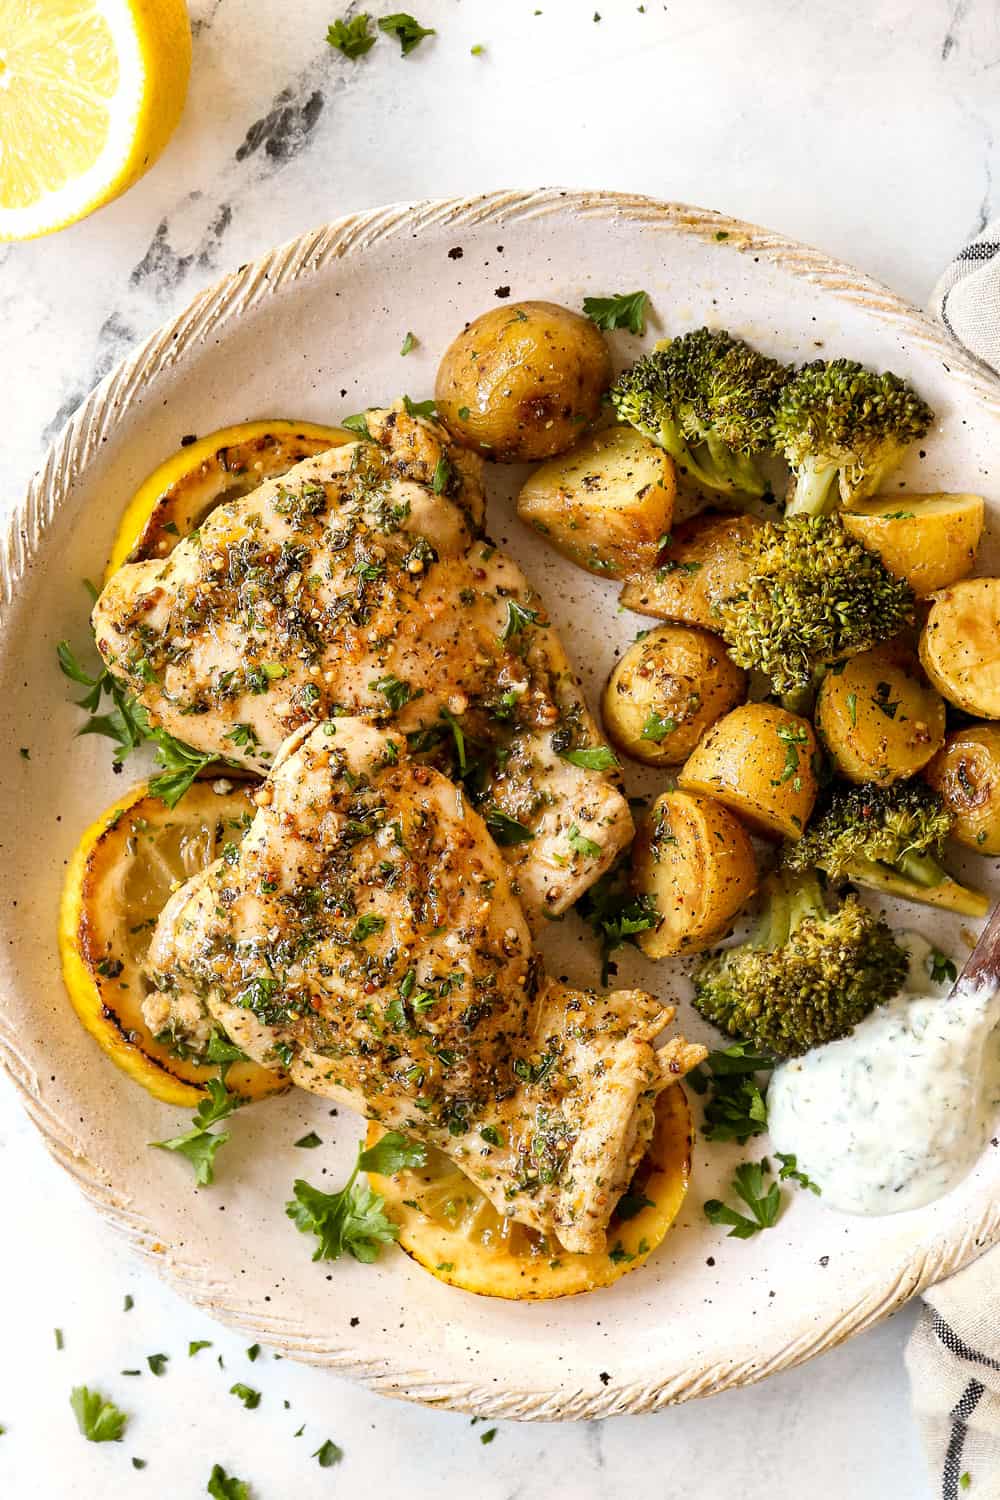 top view of lemon garlic chicken things on a plate with potatoes and broccoli